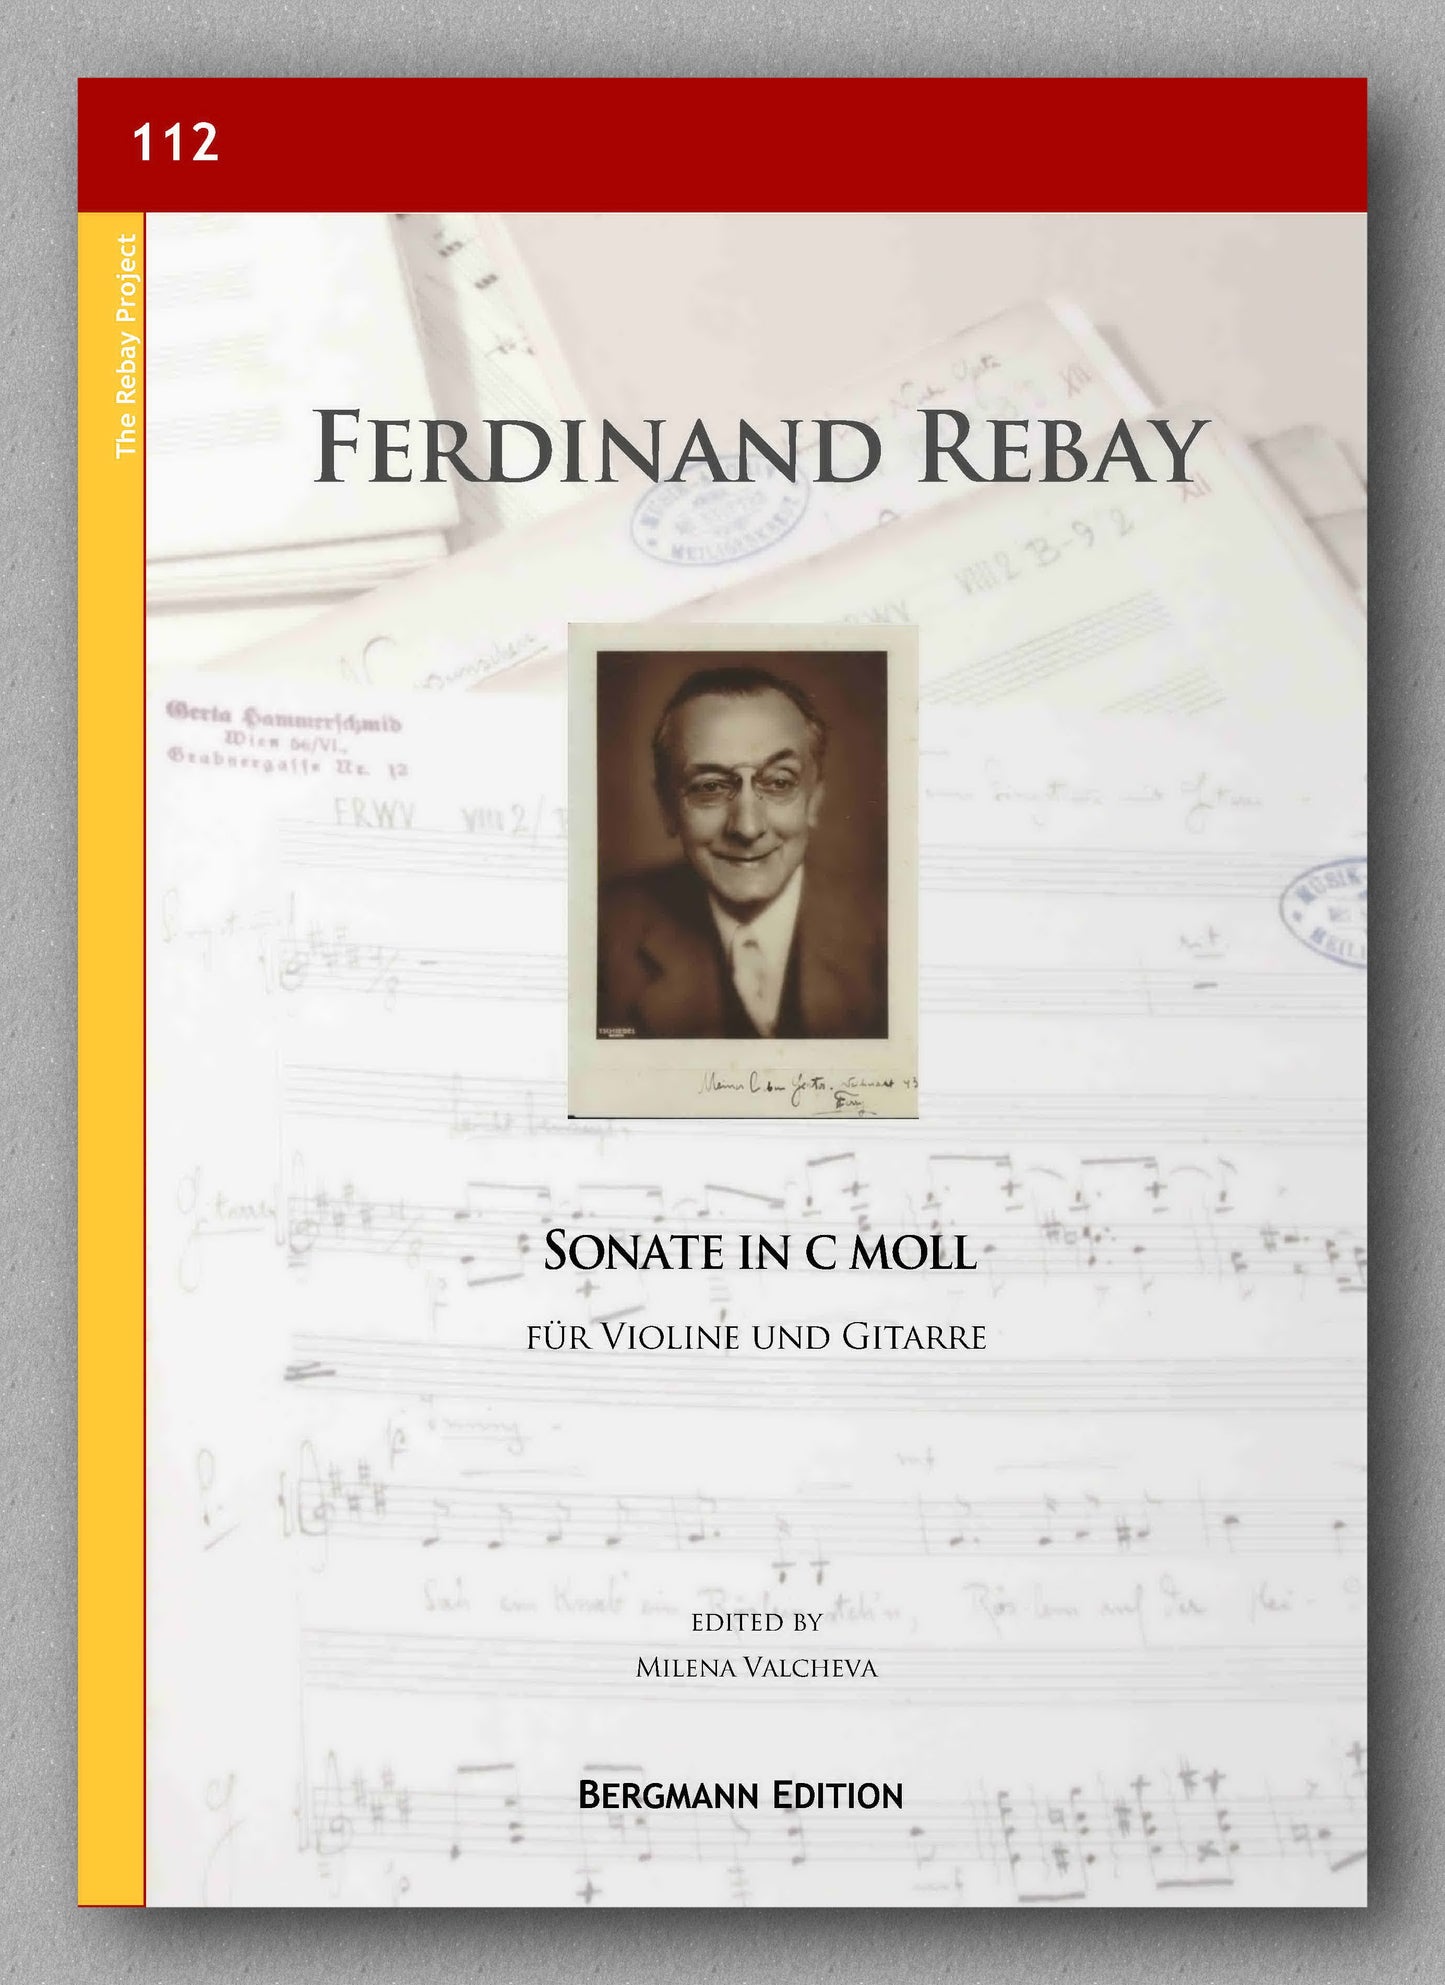 Rebay [112], Sonate in c moll - Preview of the cover